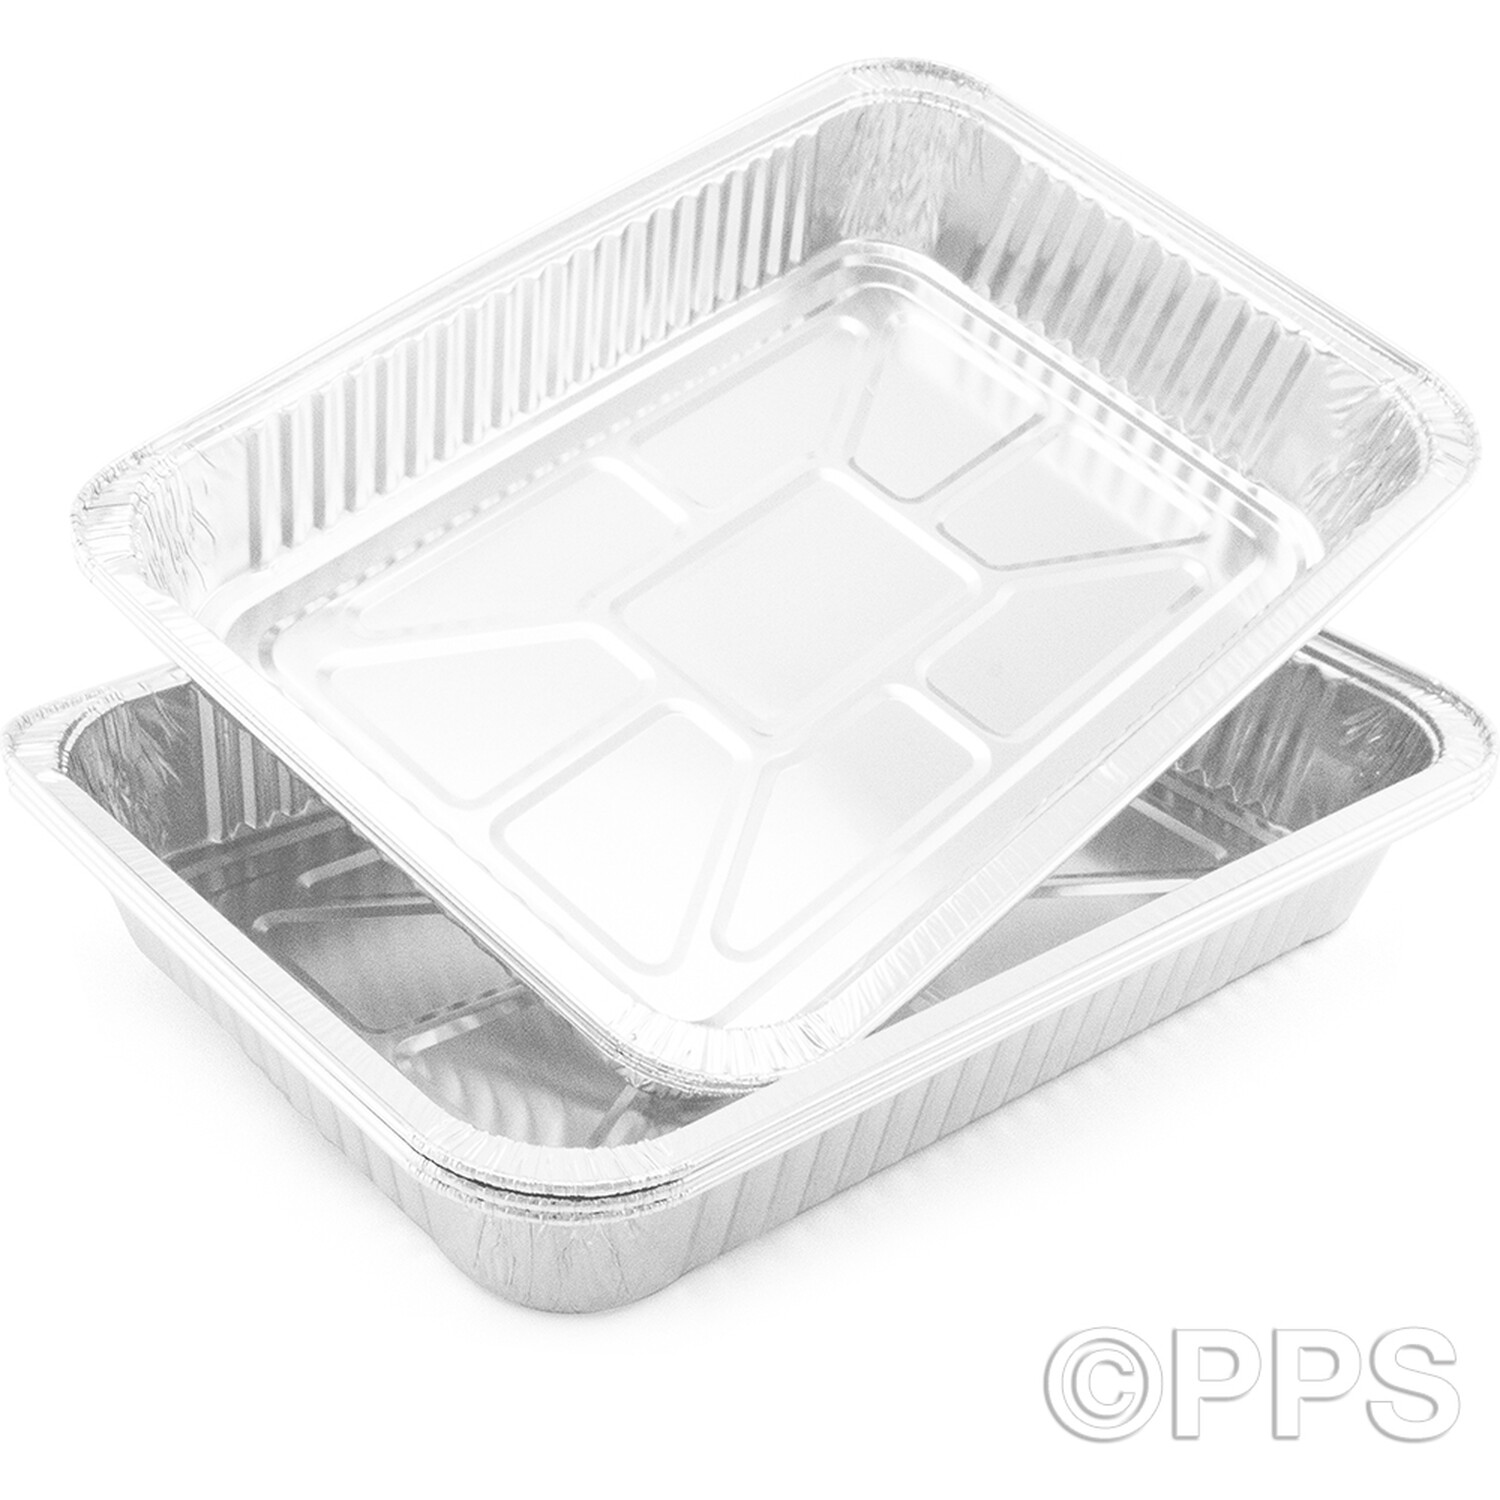 Silver Foil Bake Trays 3 Pack Image 2